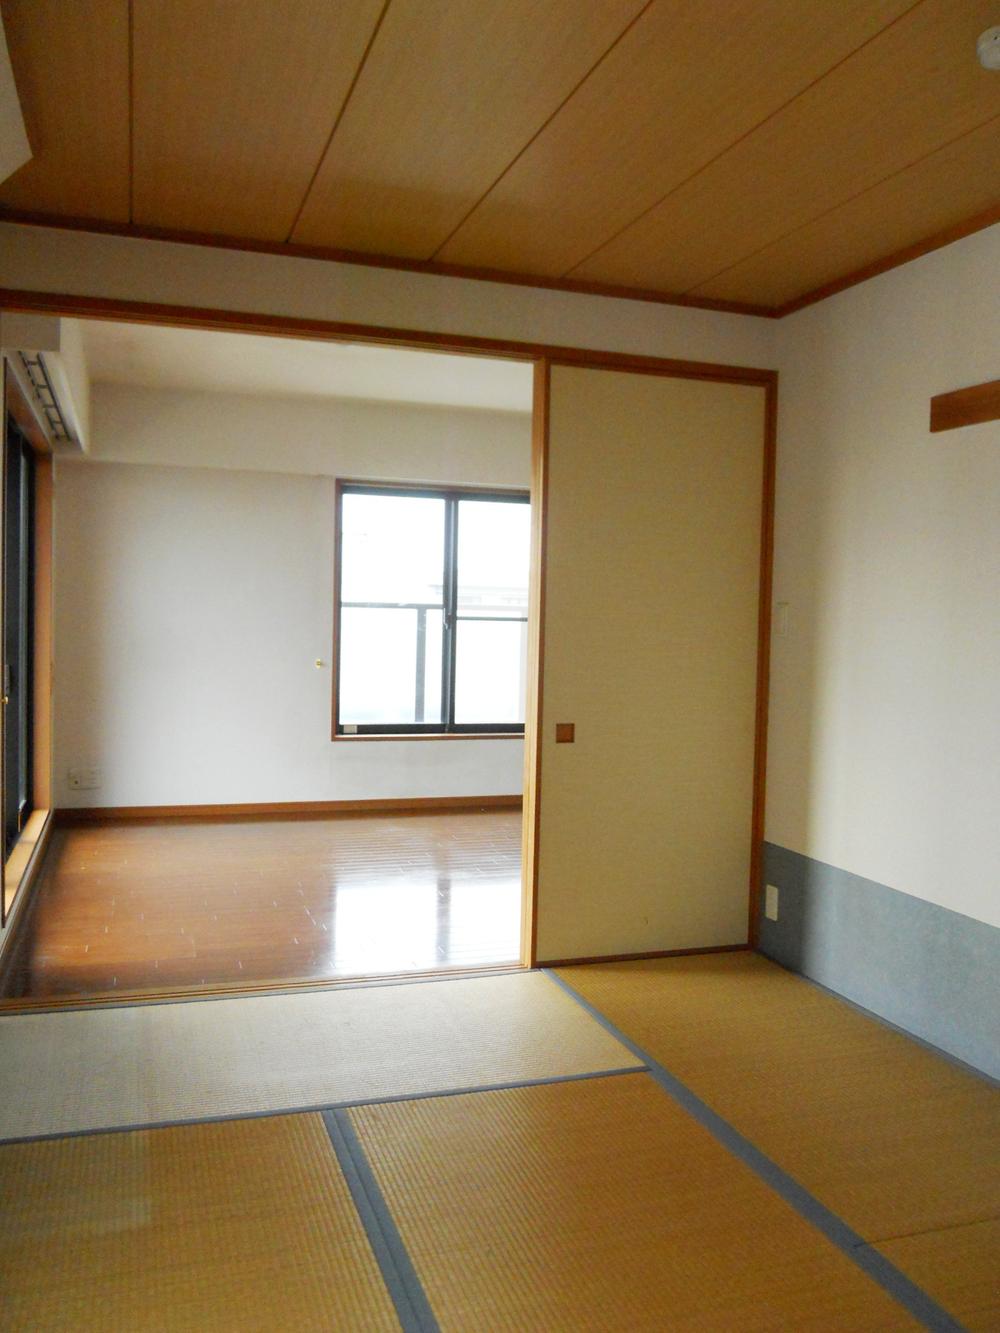 Non-living room. Overlooking the living-dining than Japanese-style room